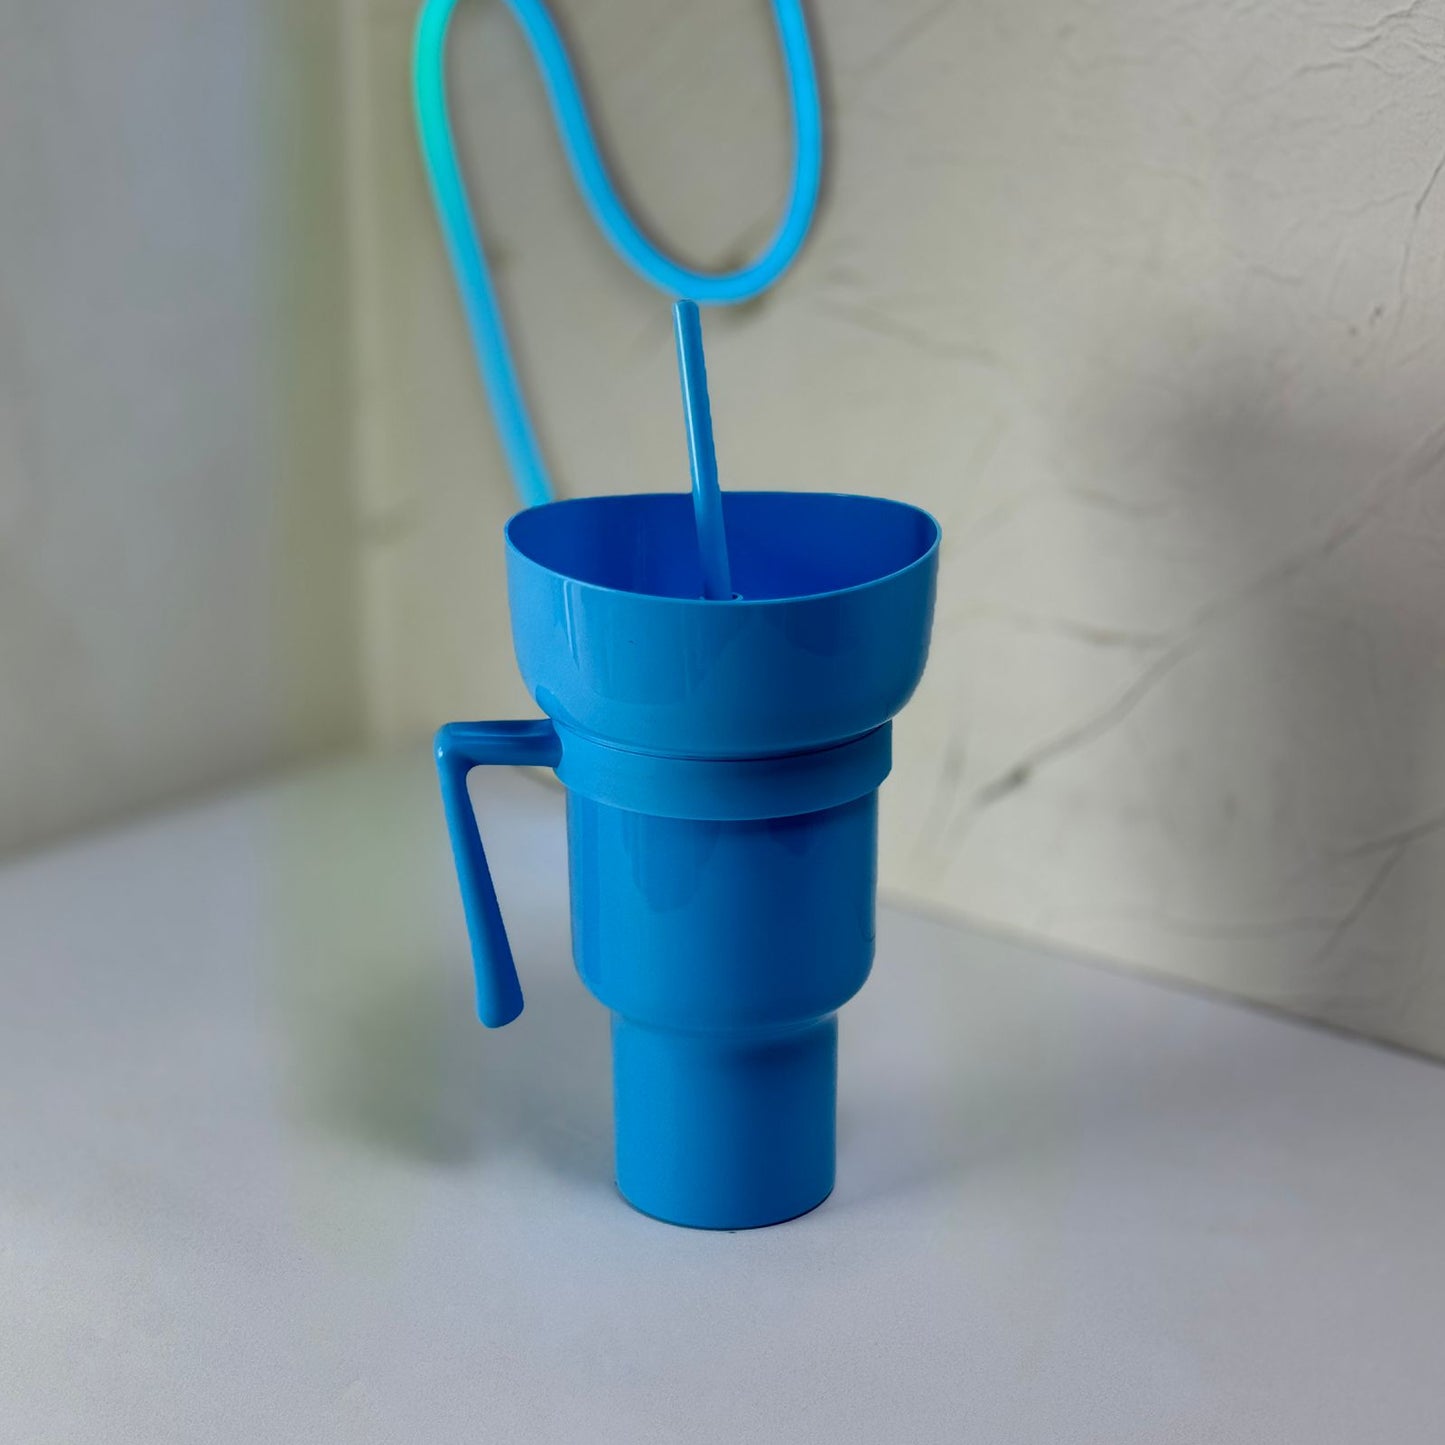 The 2-in-1 Cup